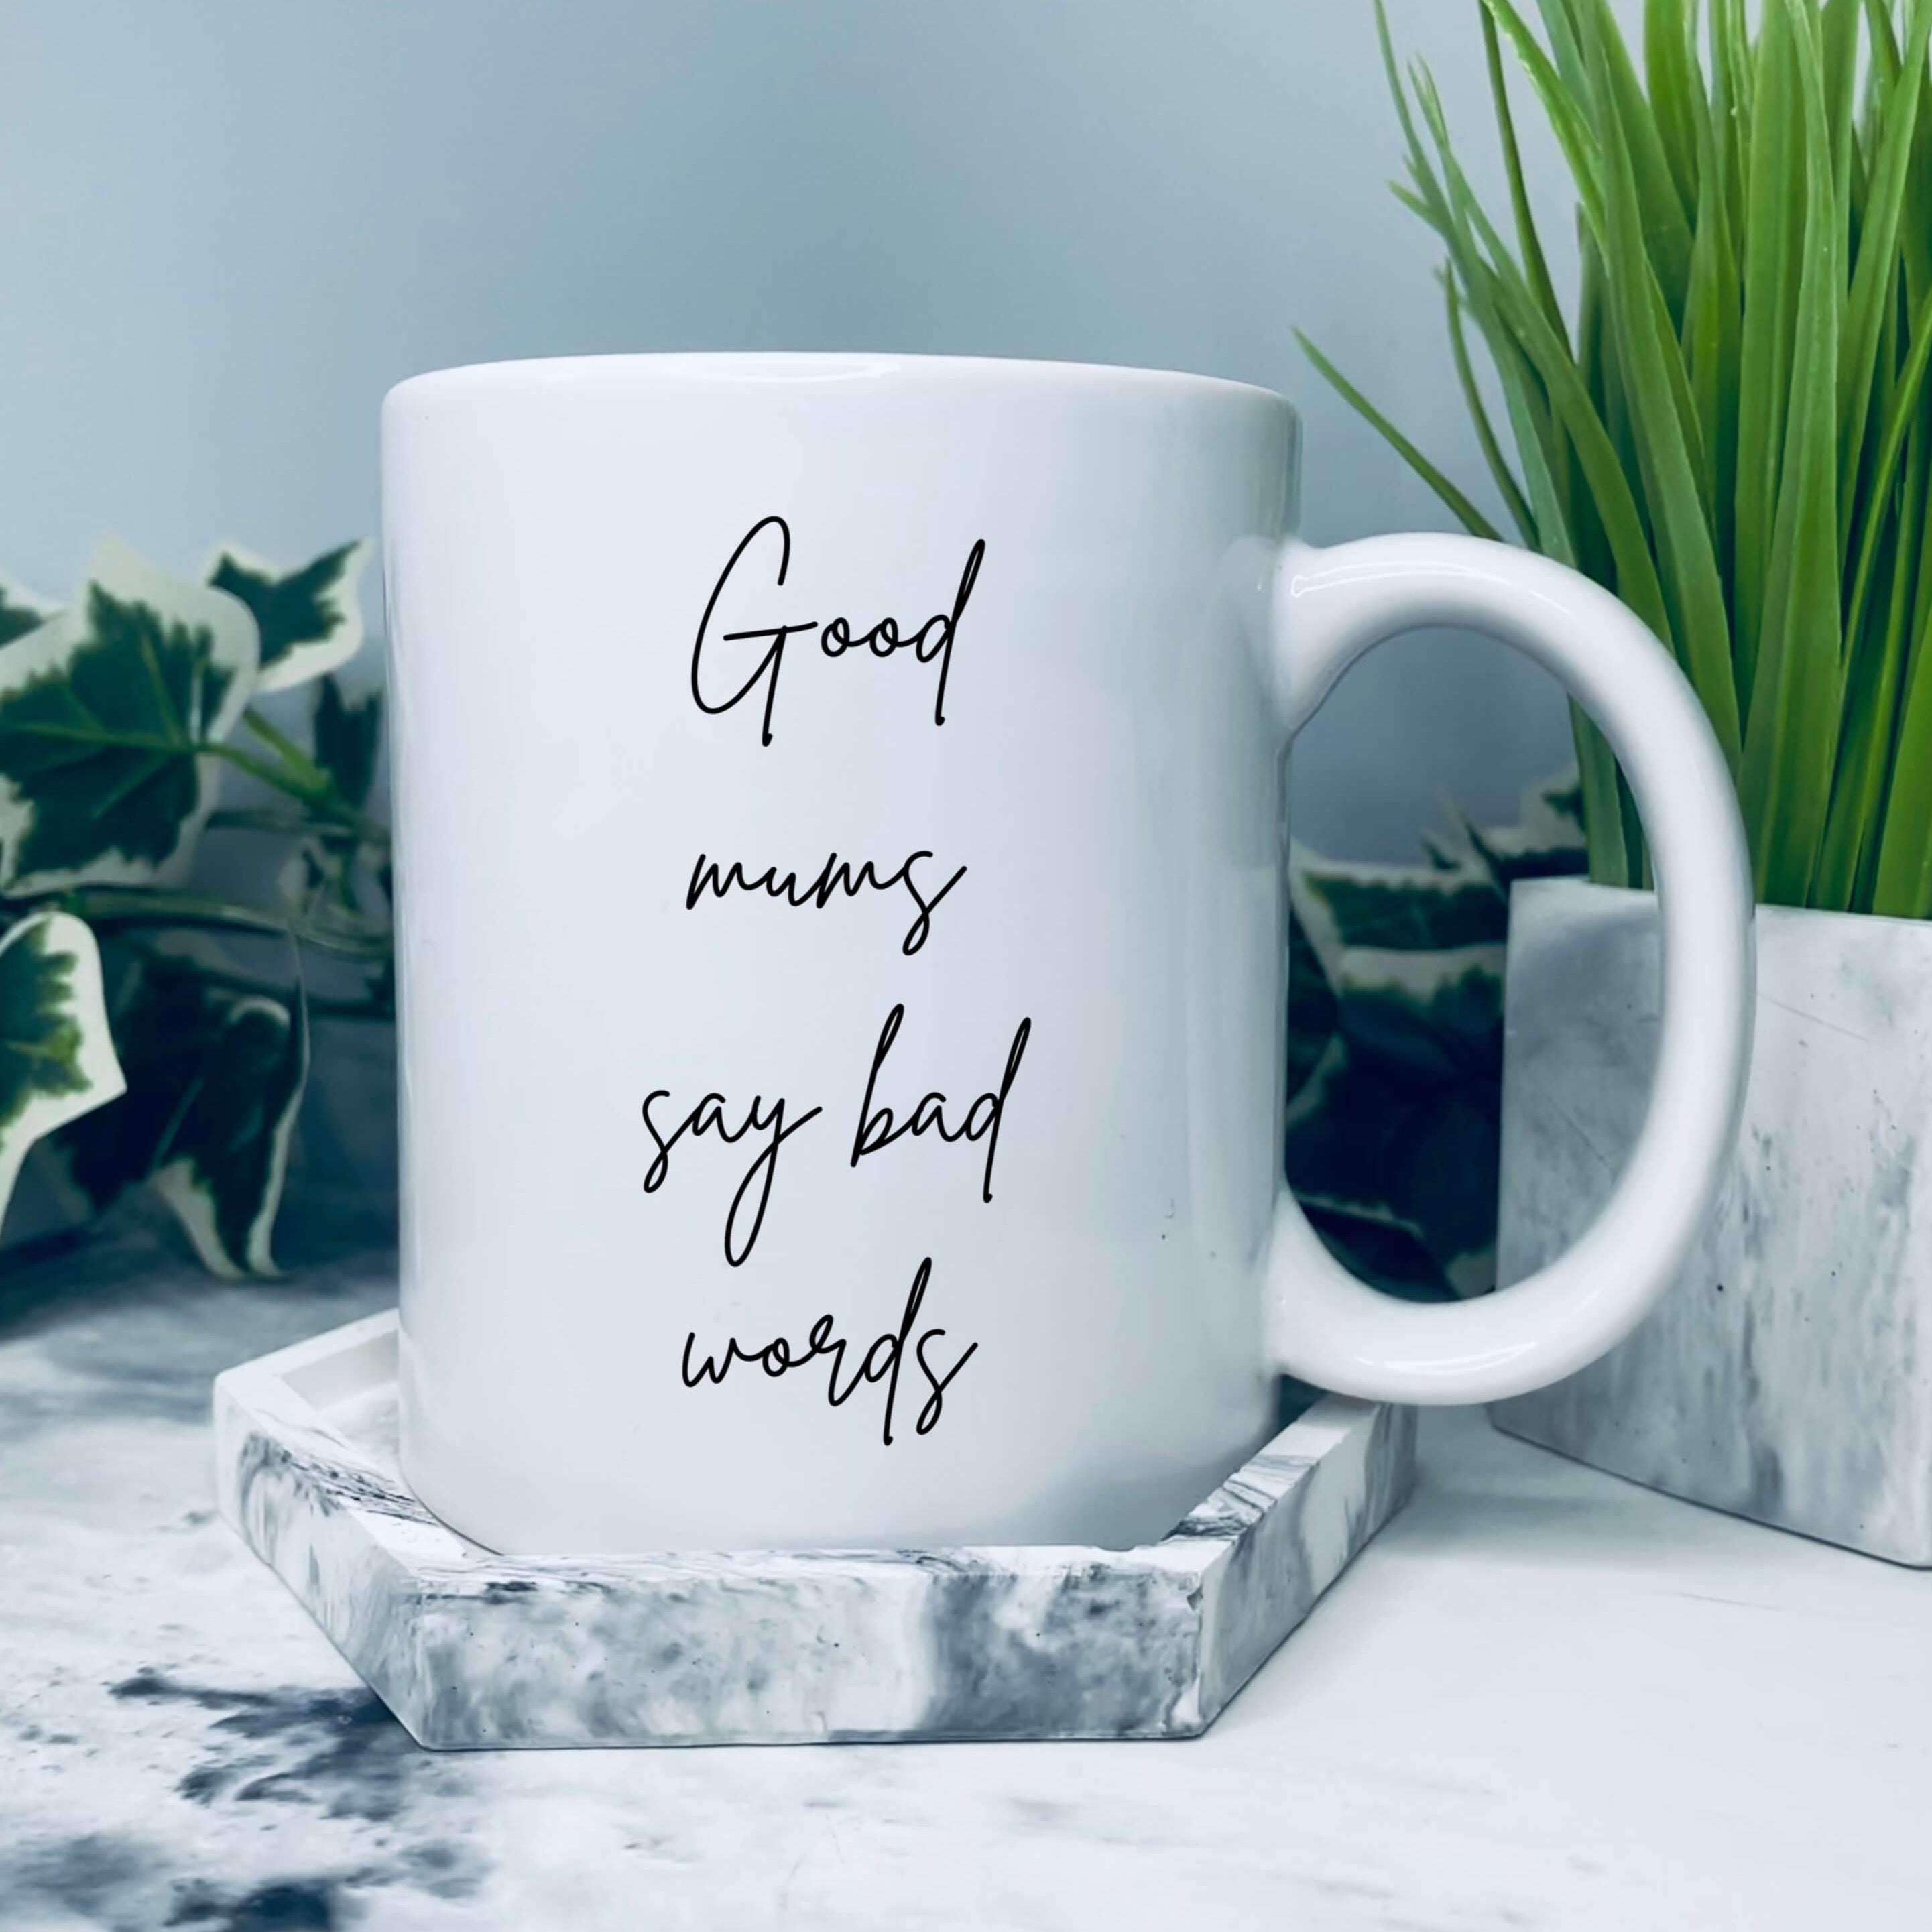 Mug with text in a handwriting style that says: good mums say bad words